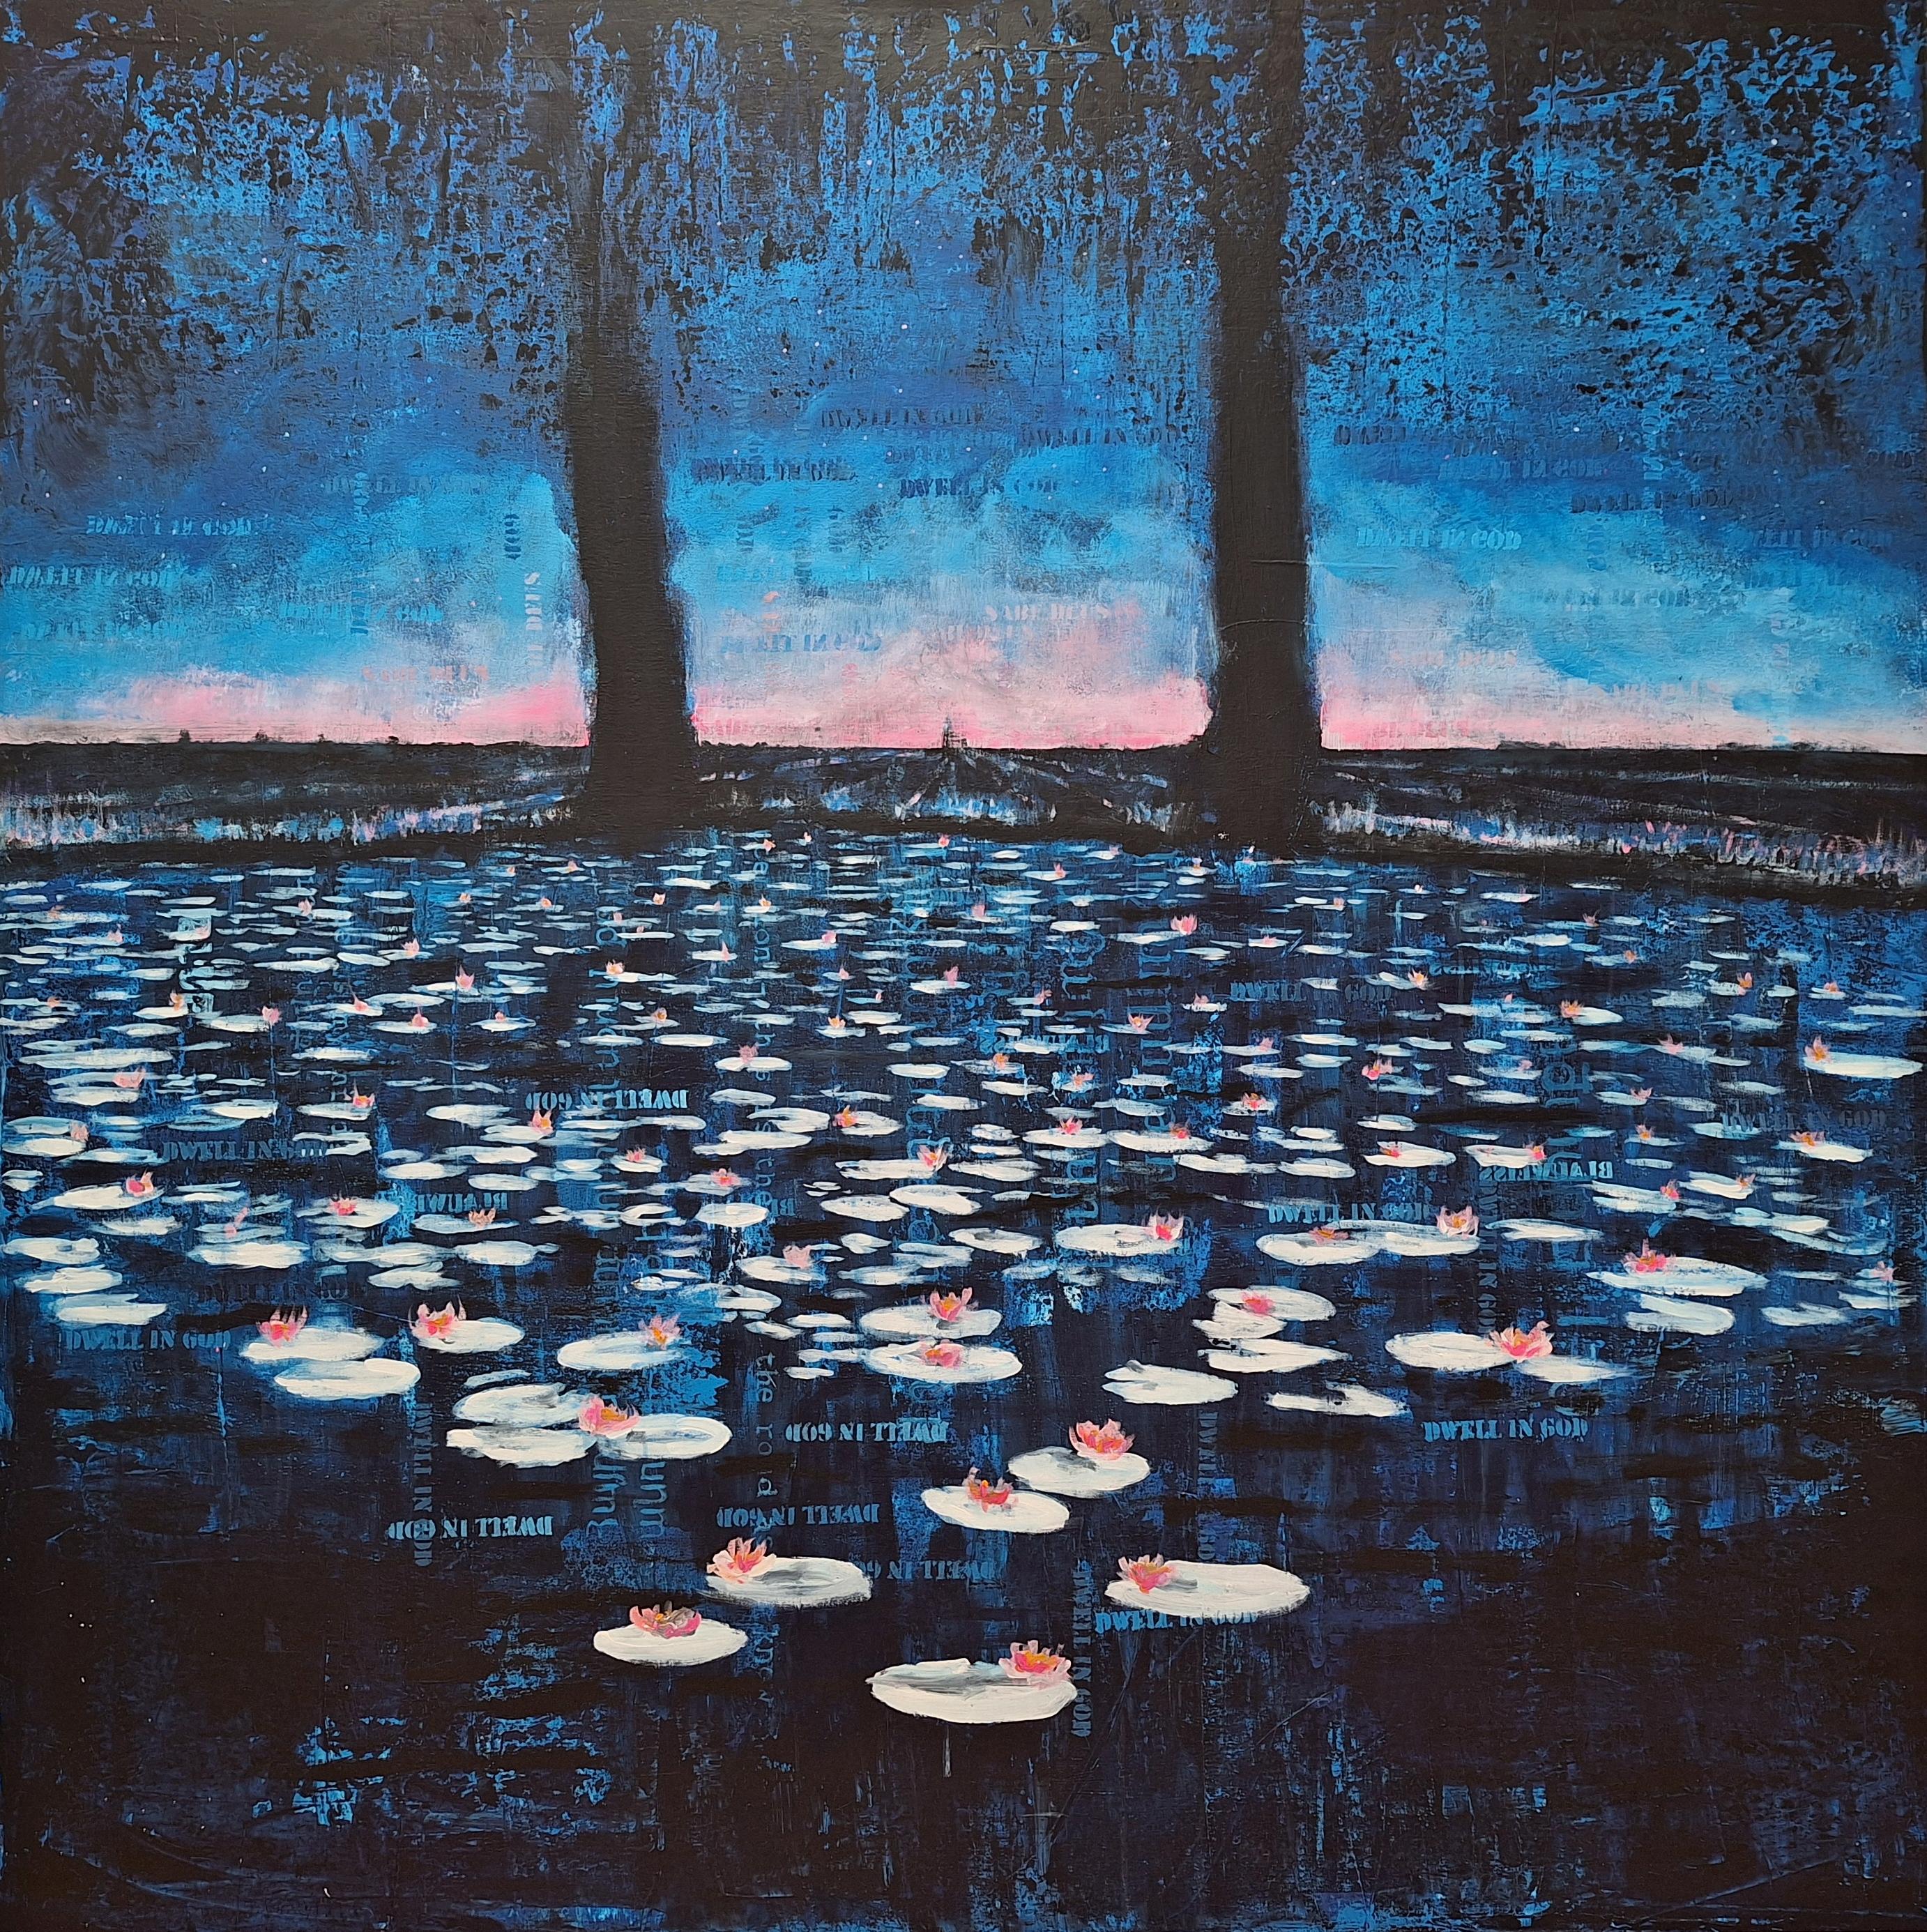 Michael Pröpper Figurative Painting - Waterlilies - contemporary water and flower scene, vibrant landscape painting 